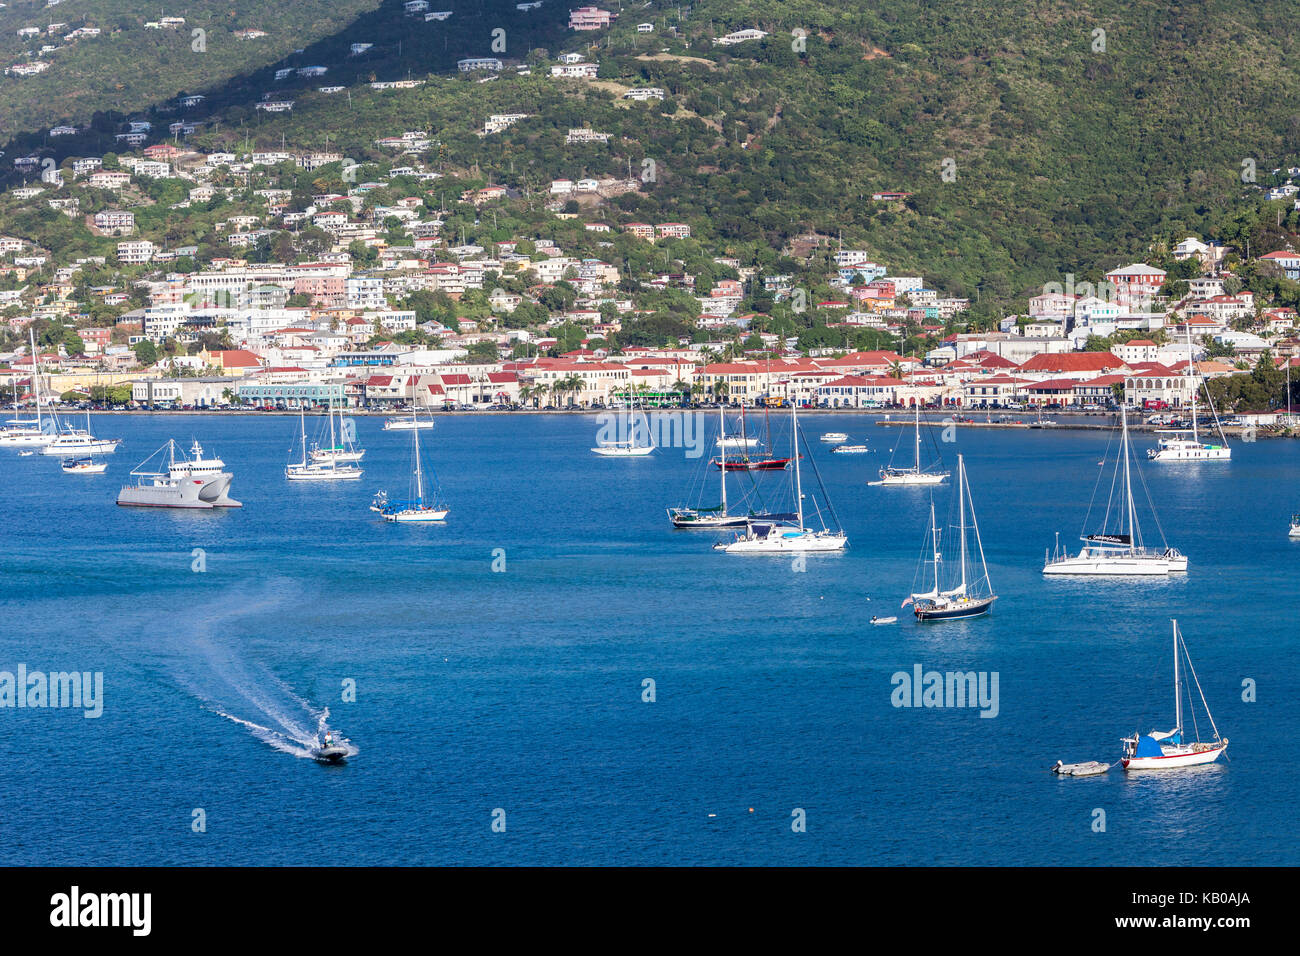 Charlotte Amalie, St. Thomas, U.S. Virgin Islands.  View of the Town from the Harbor. Stock Photo